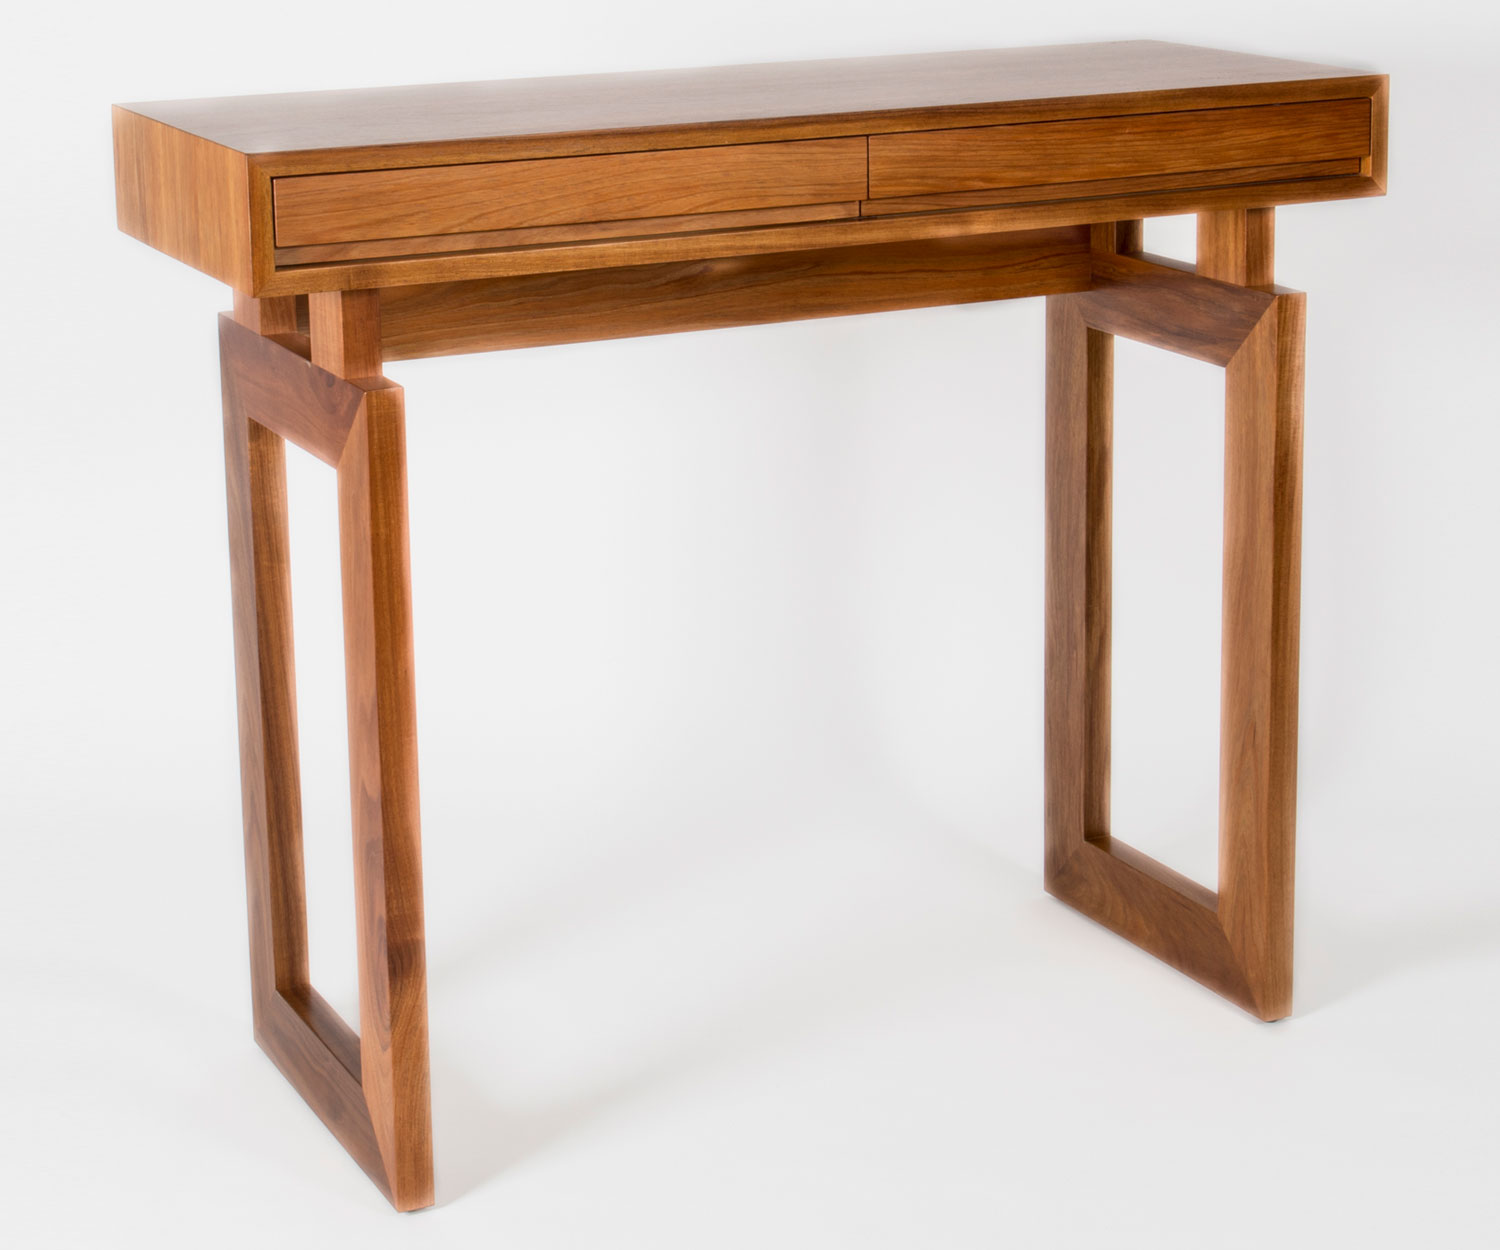 Highfields Console Table by Australian furniture maker, FHG